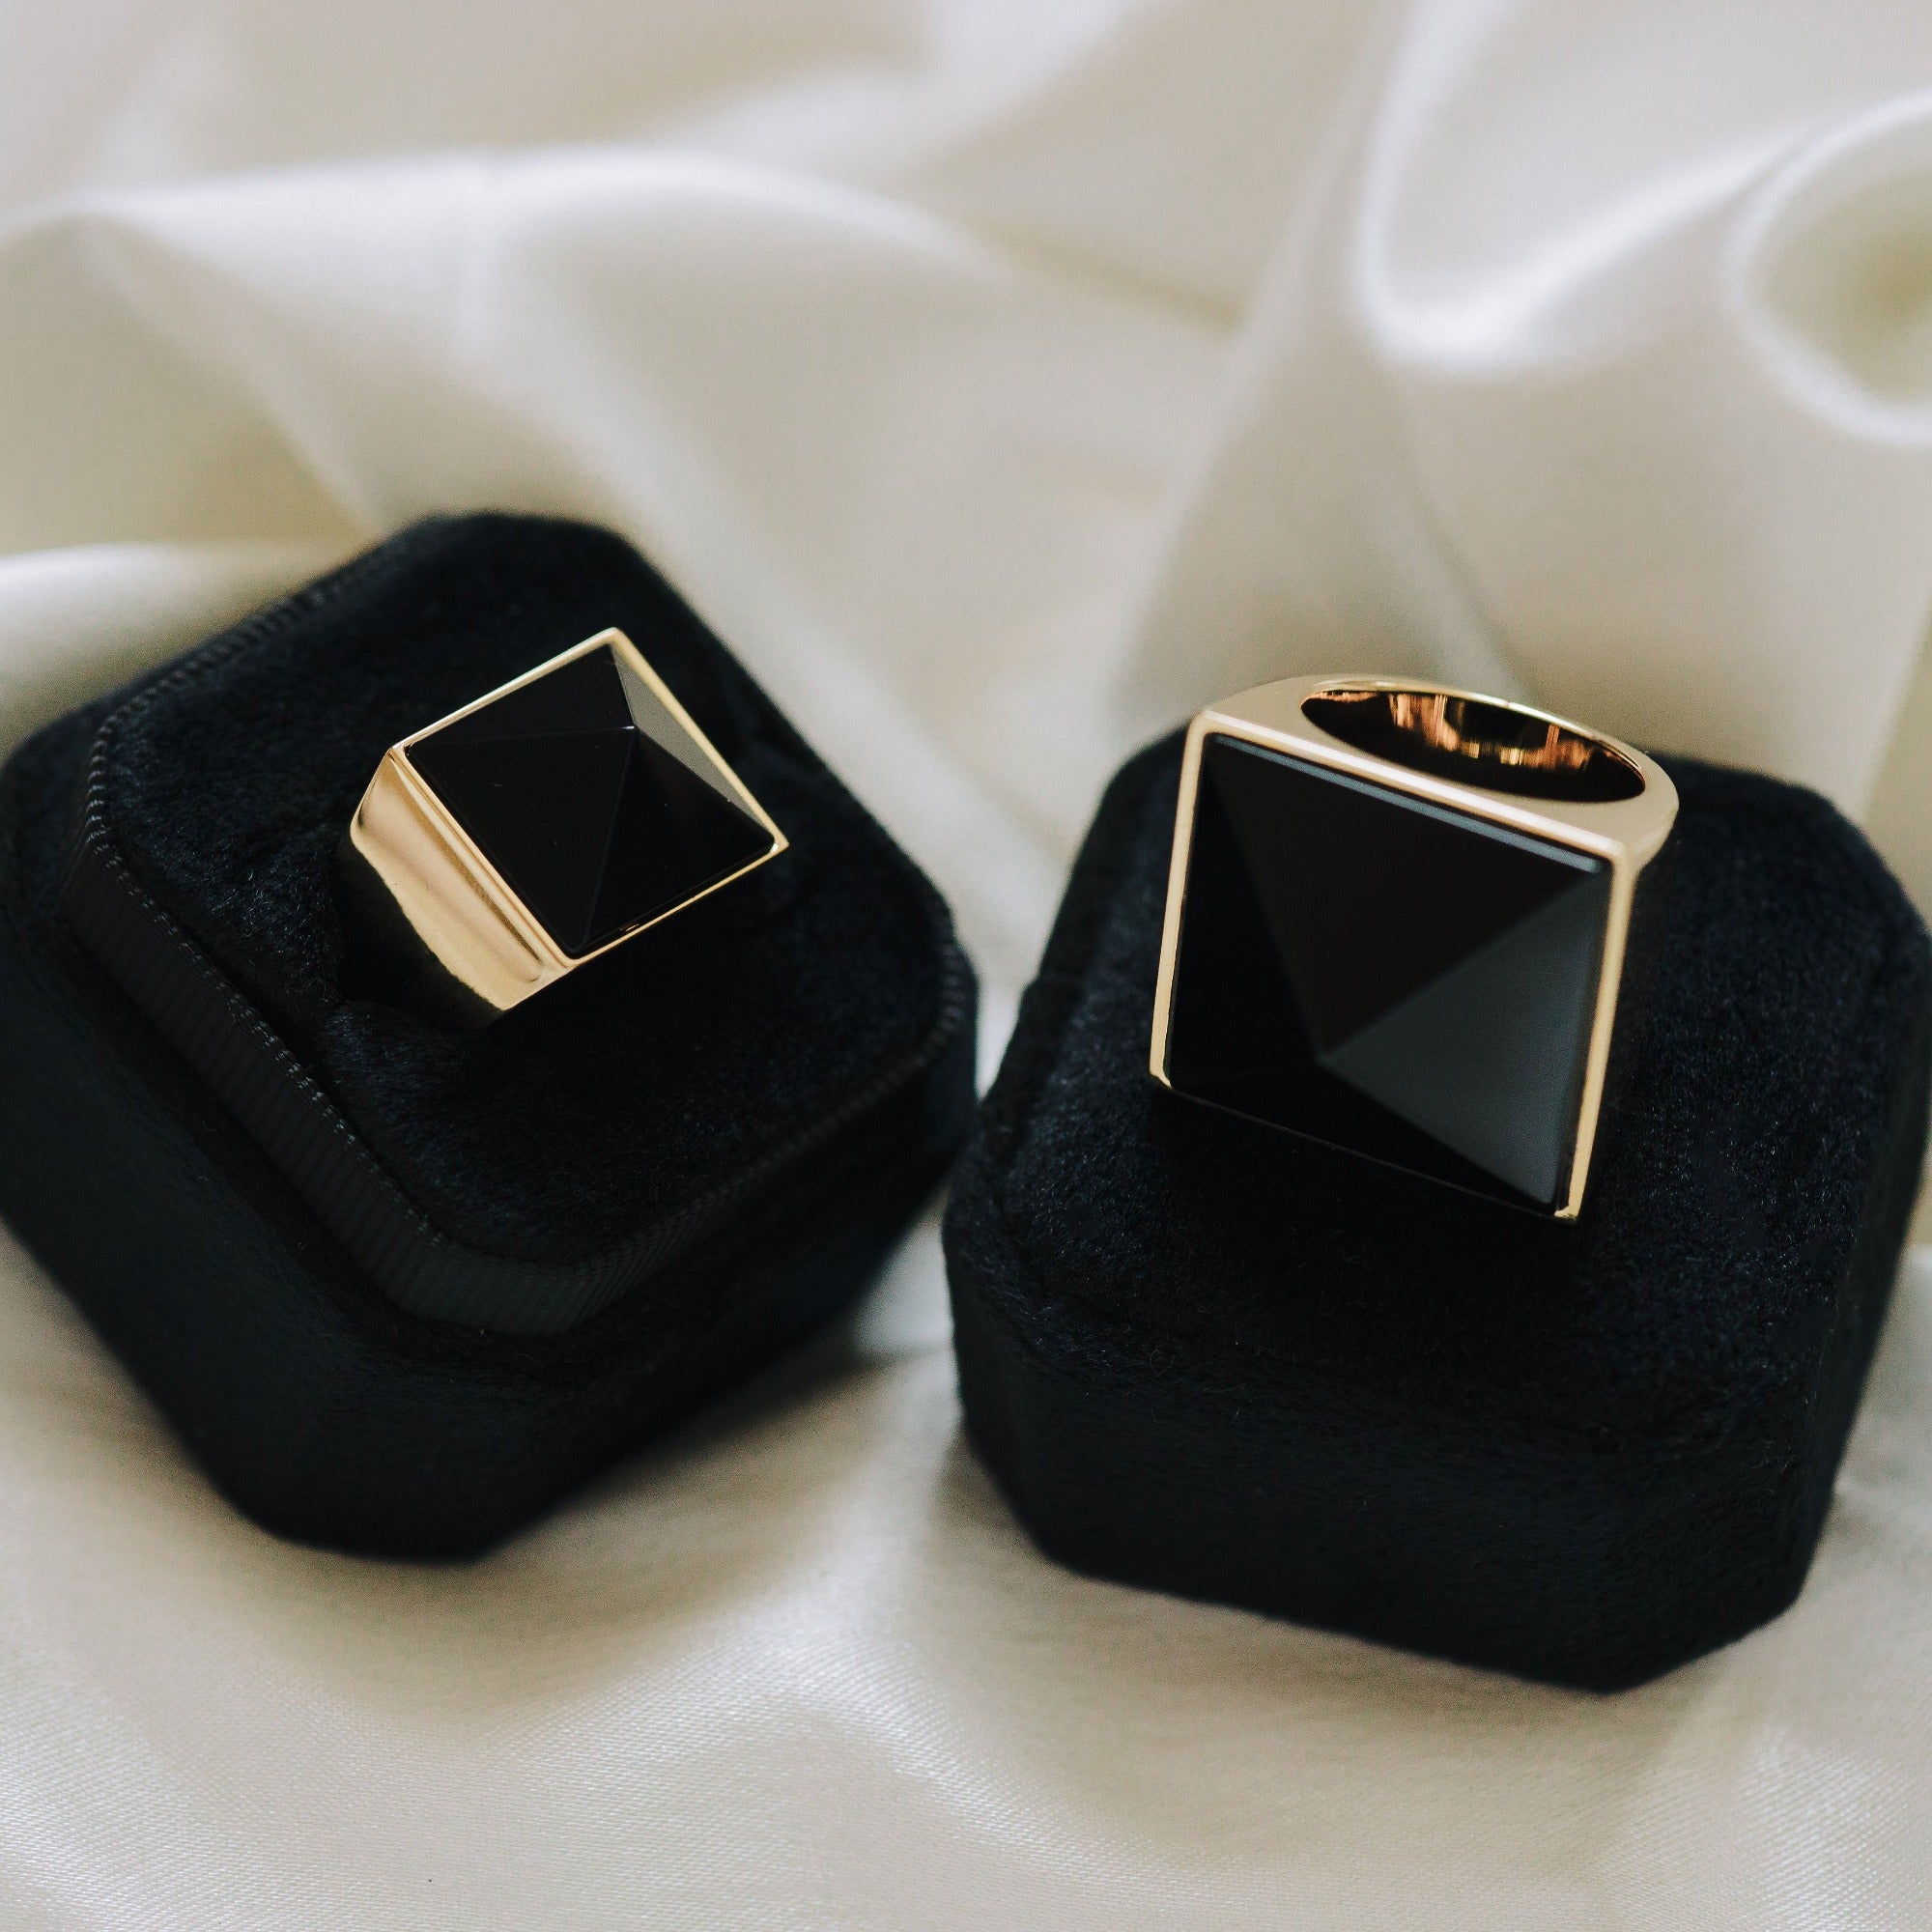 Pyramid Ring - Onyx Grande by Erin Fader Jewelry